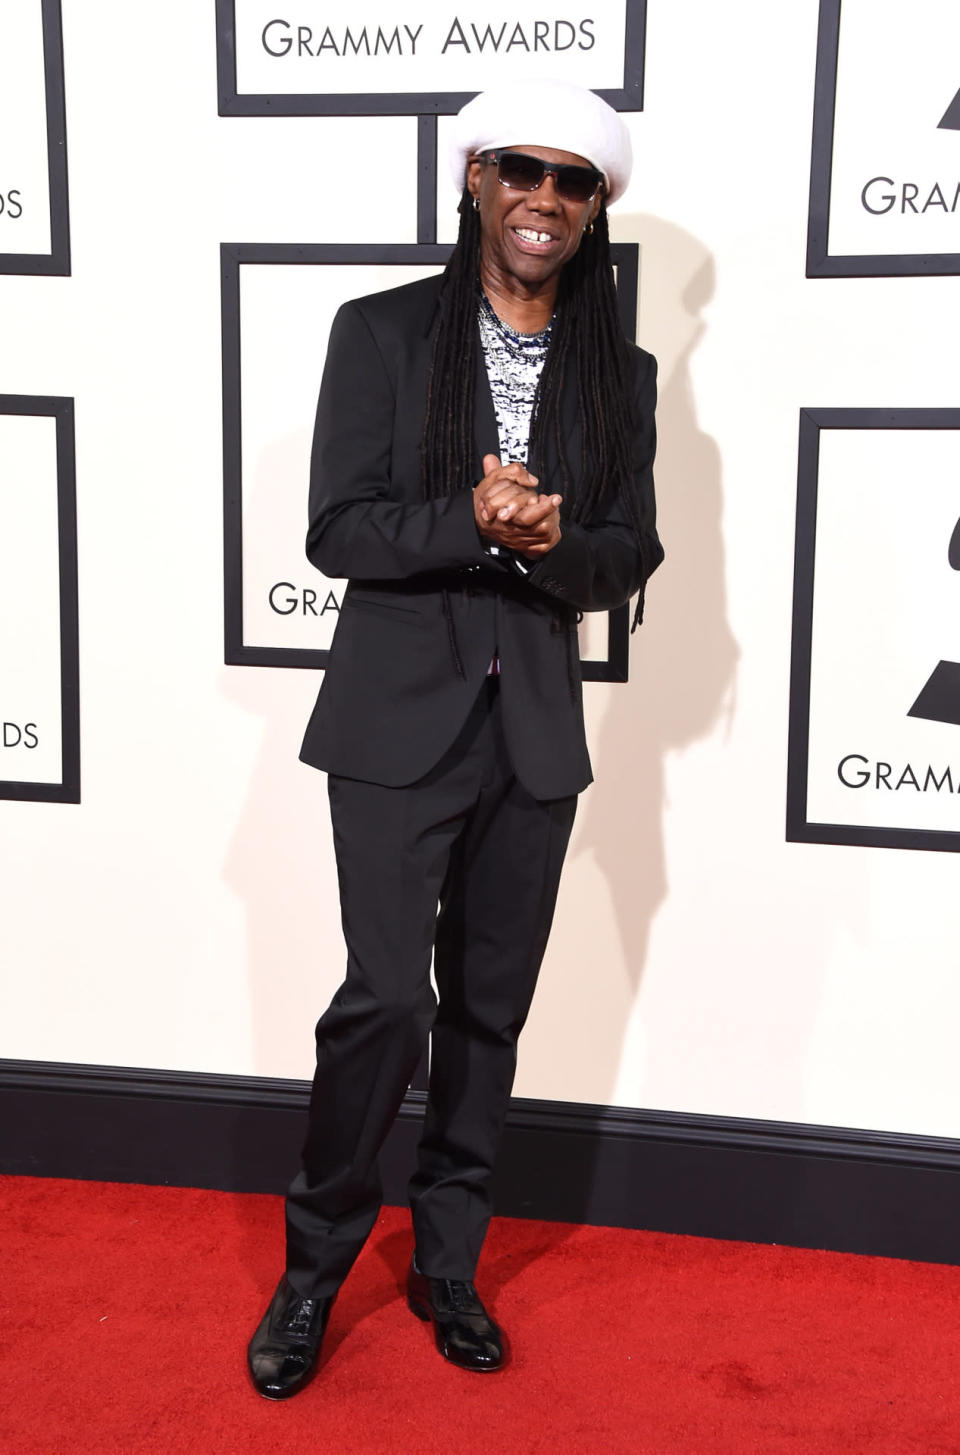 Worst: Nile Rodgers in a white pageboy cap with a black blazer at the 58th Grammy Awards at Staples Center in Los Angeles, California, on February 15, 2016.